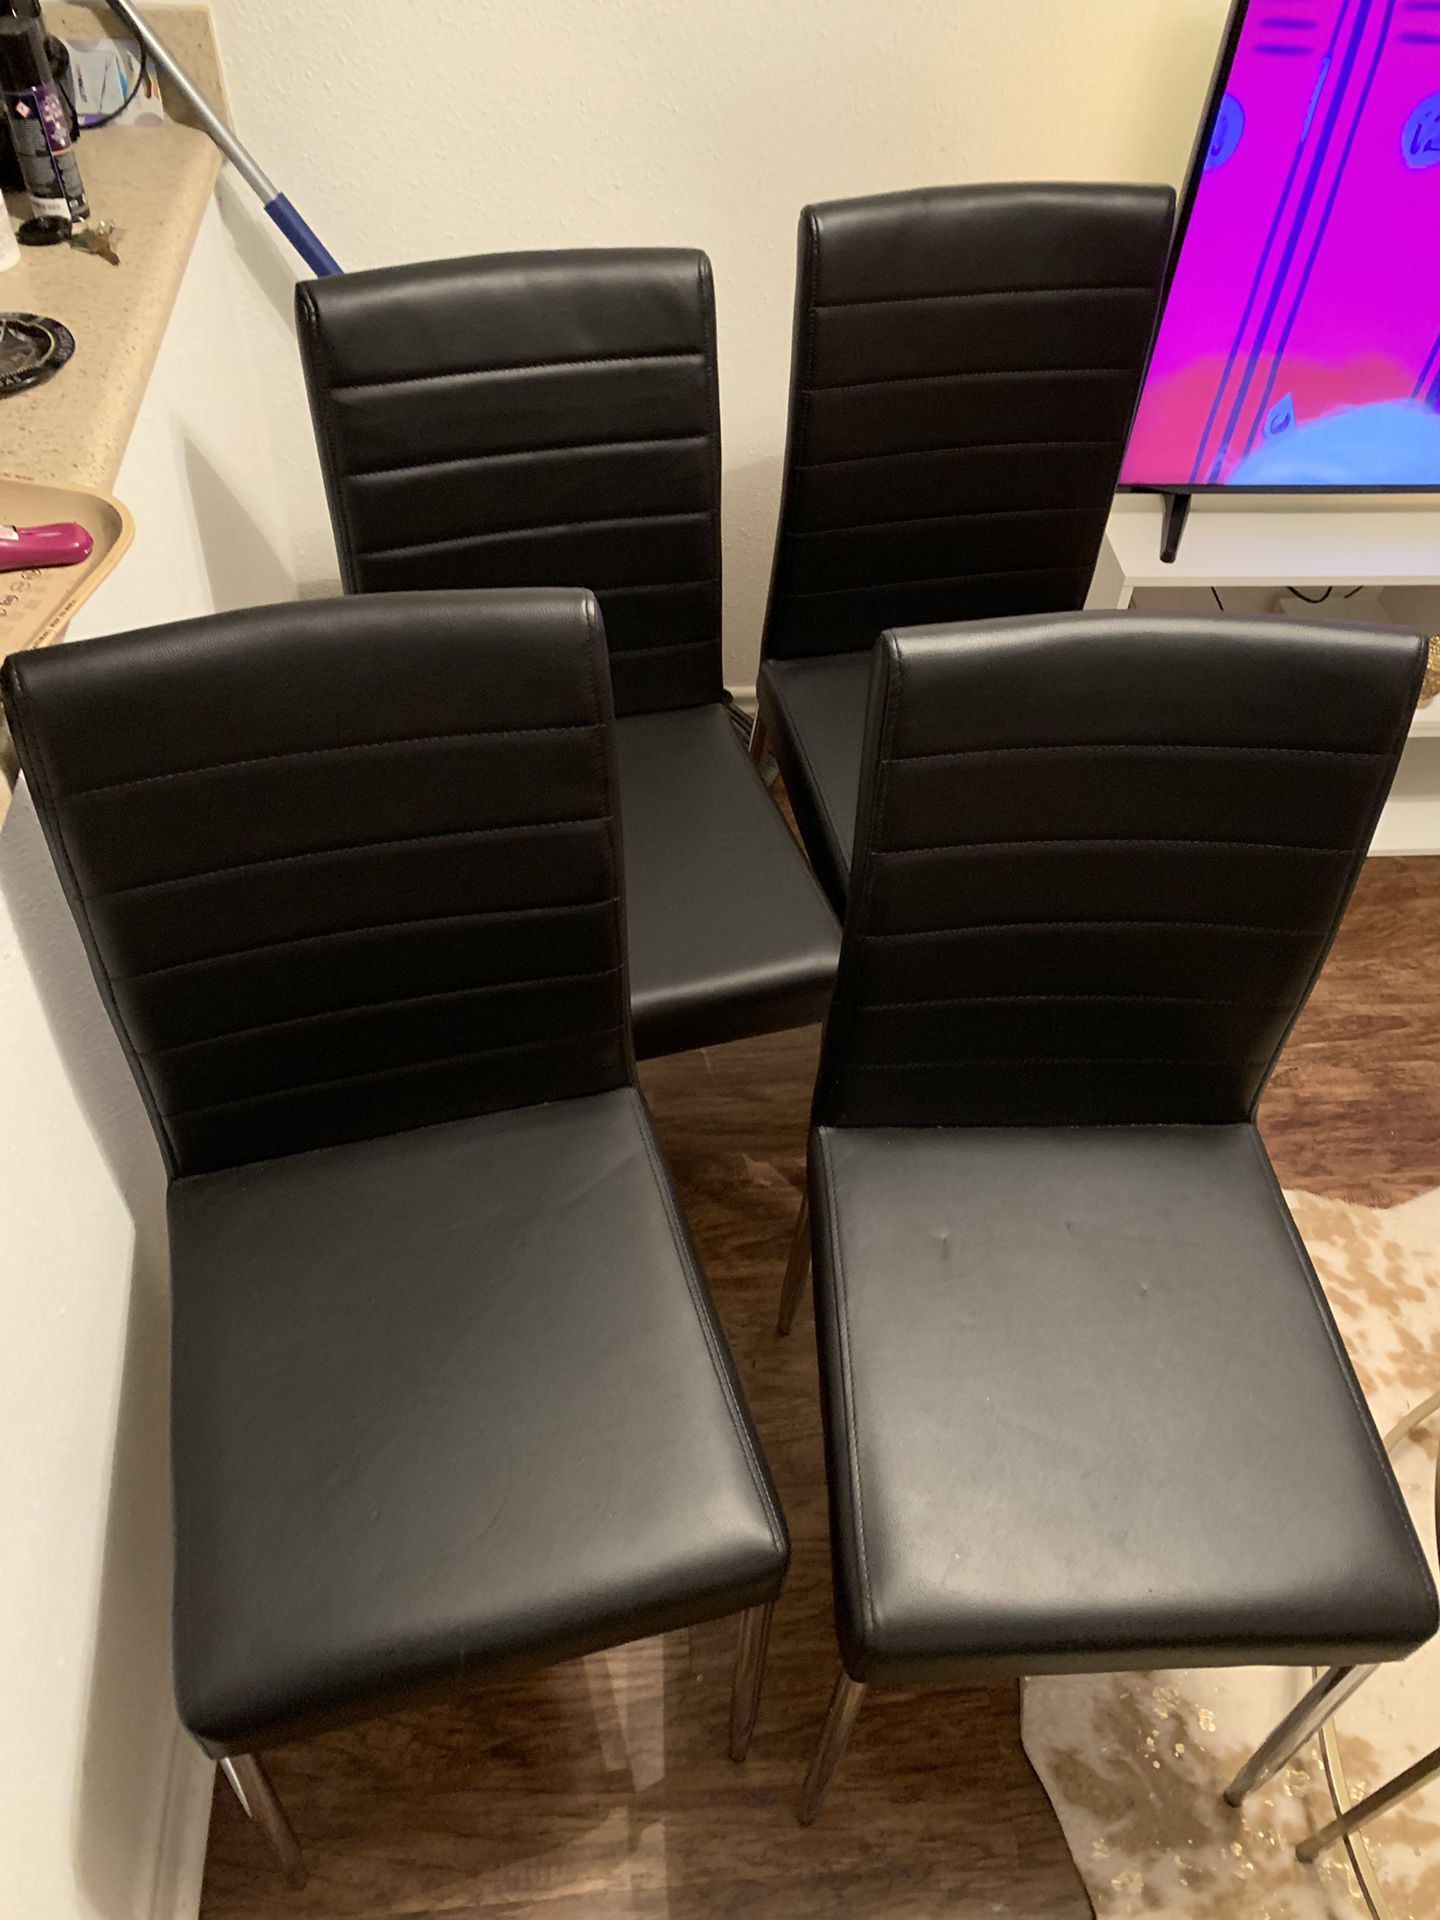 Coaster black chairs set of (4)